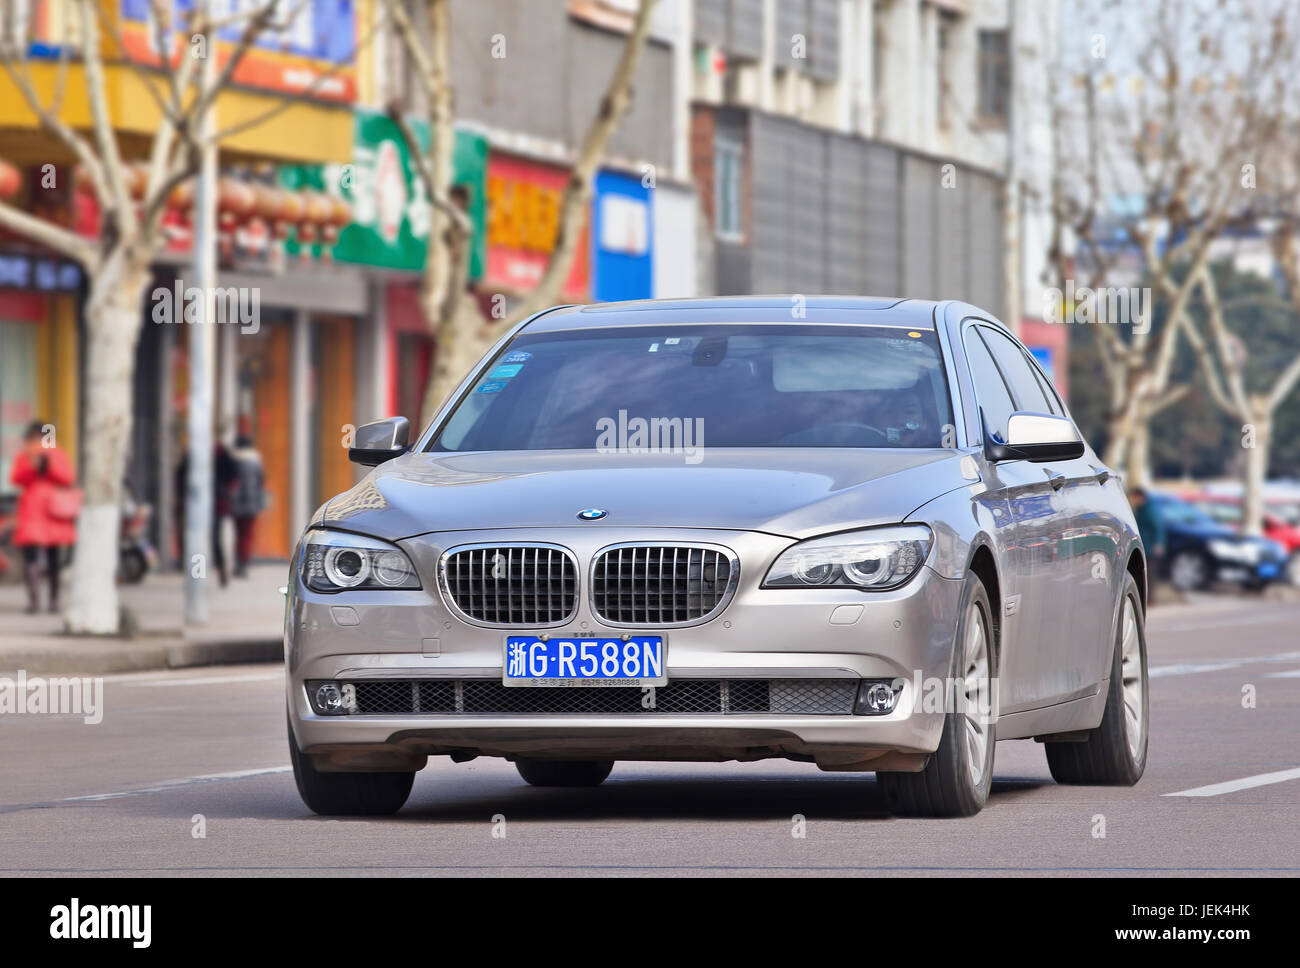 BMW 5 series on the road. BMW sales will be hit in 2016 by cut-throat competition, slowing Chinese economy and crackdown on conspicuous consumption. Stock Photo